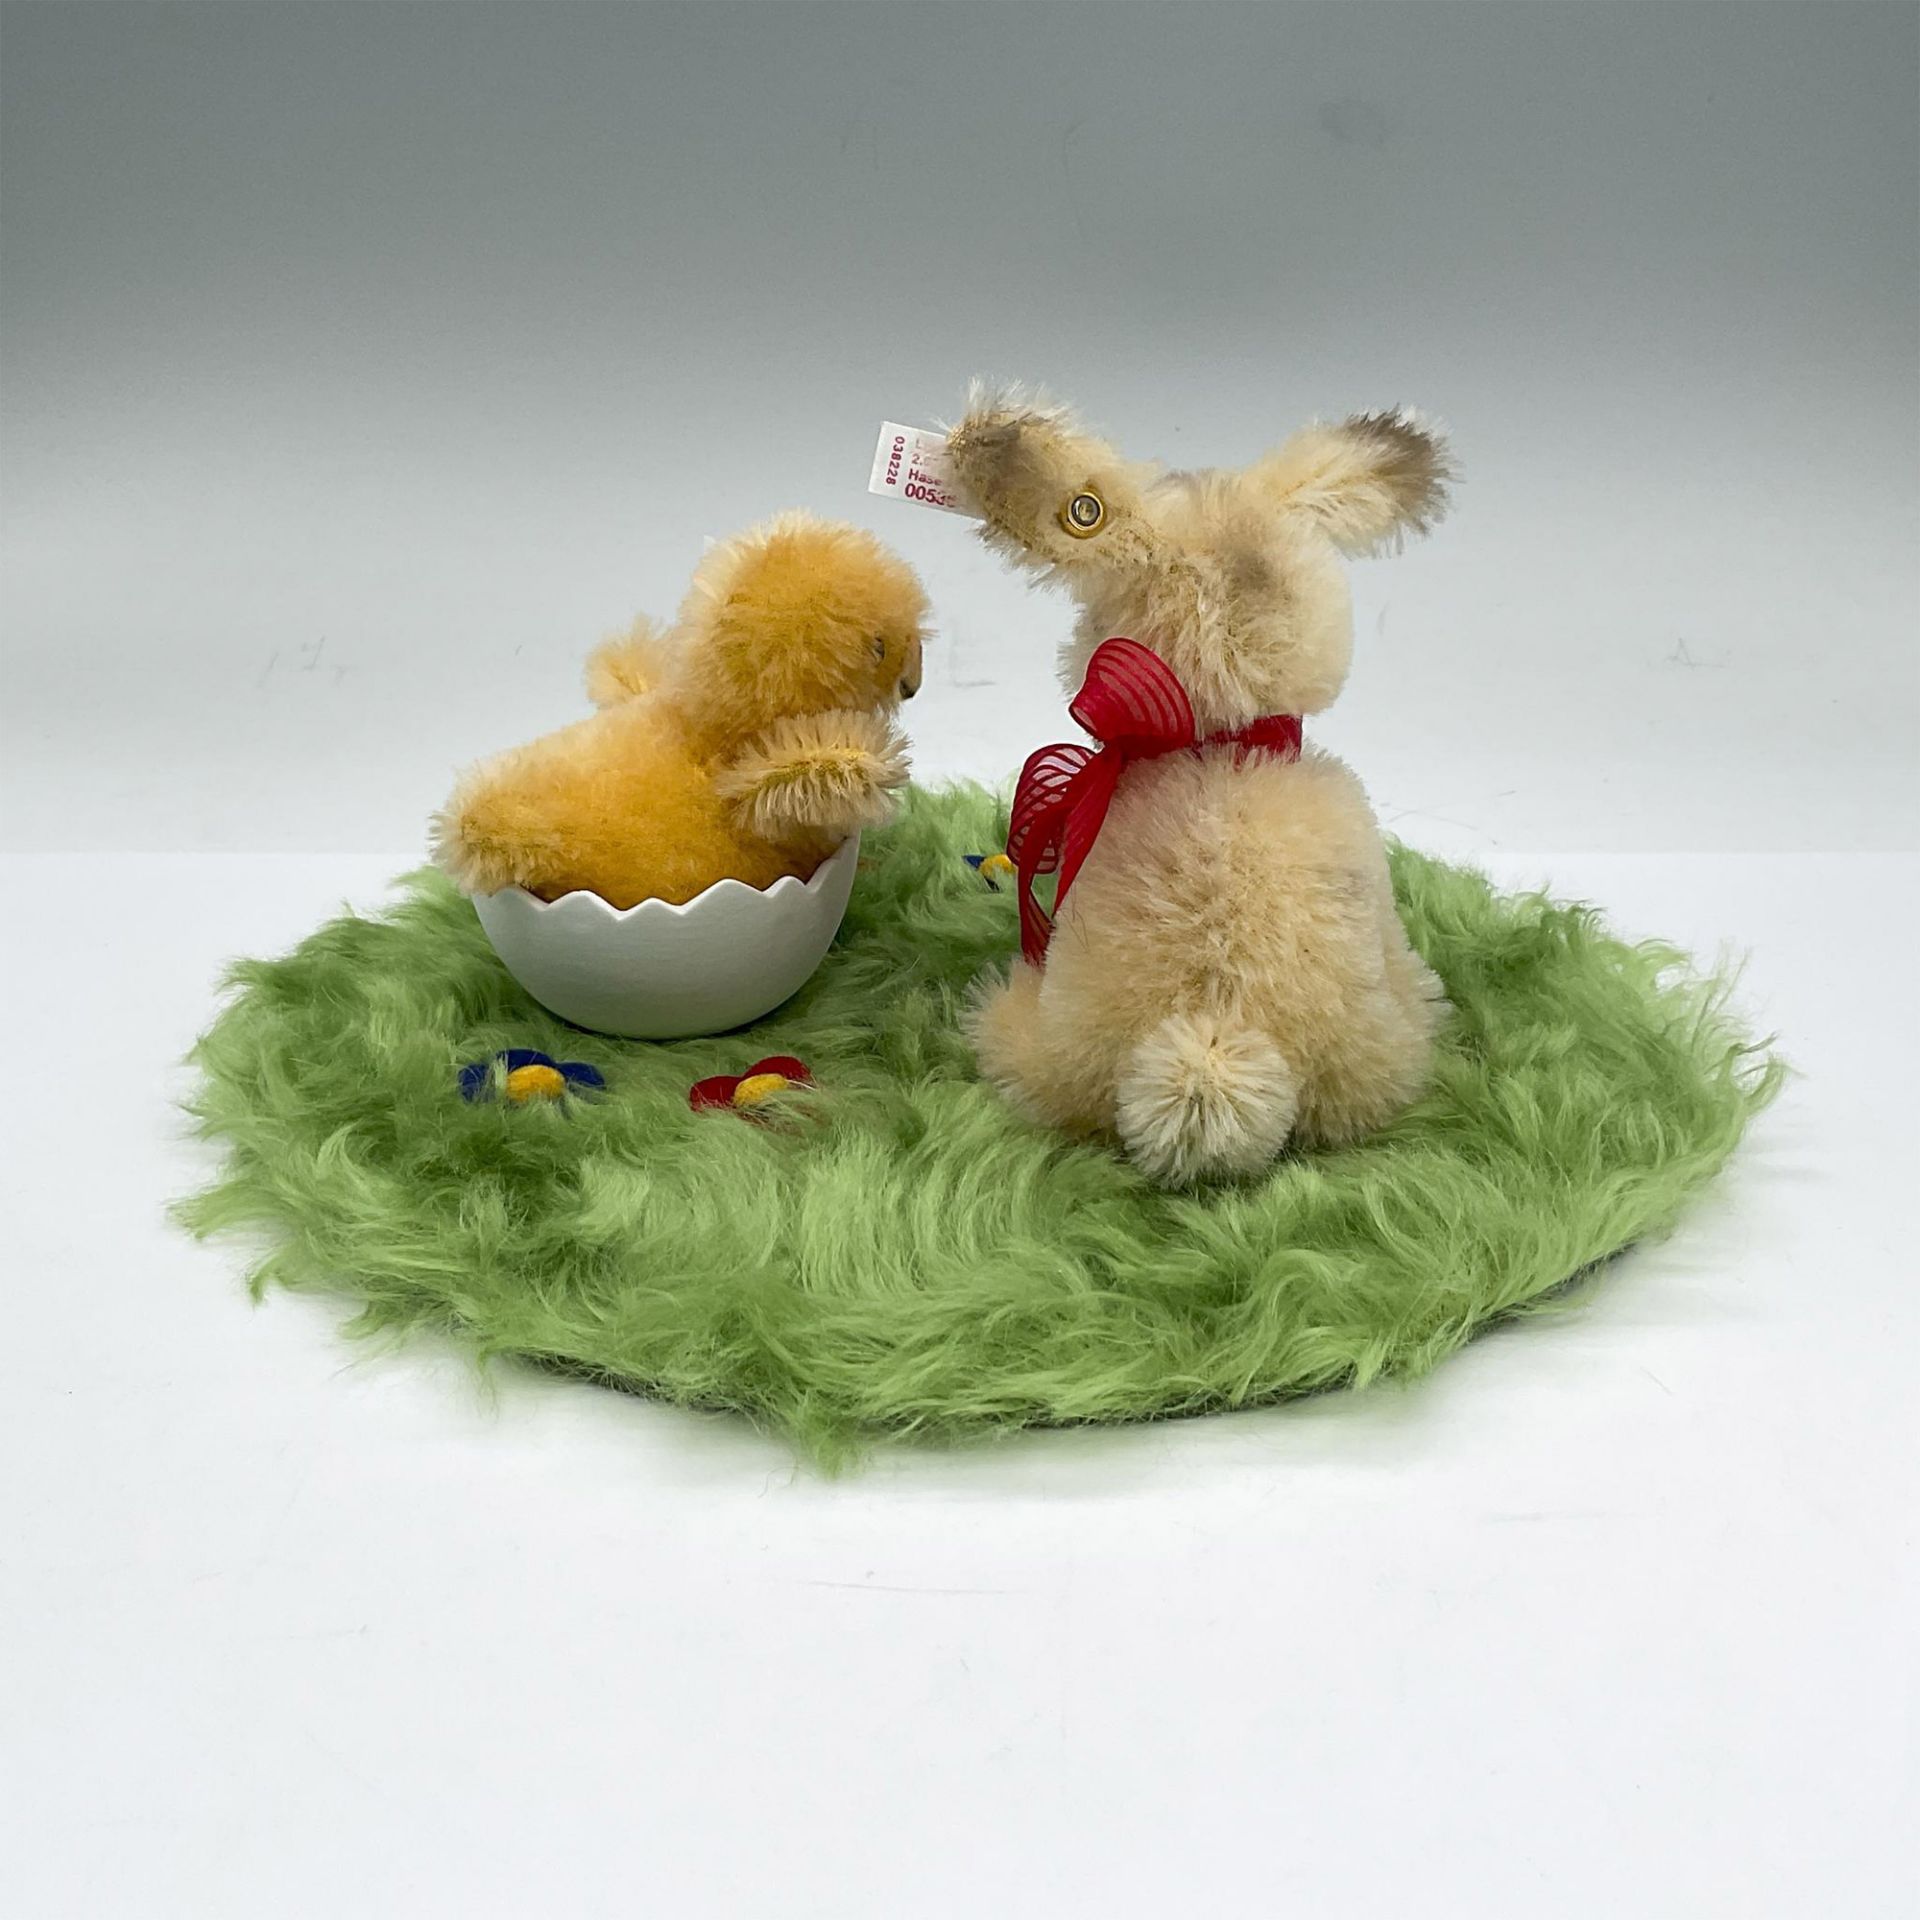 Steiff Mohair Figures, Easter Diorama of Bunny and Chick - Bild 3 aus 5